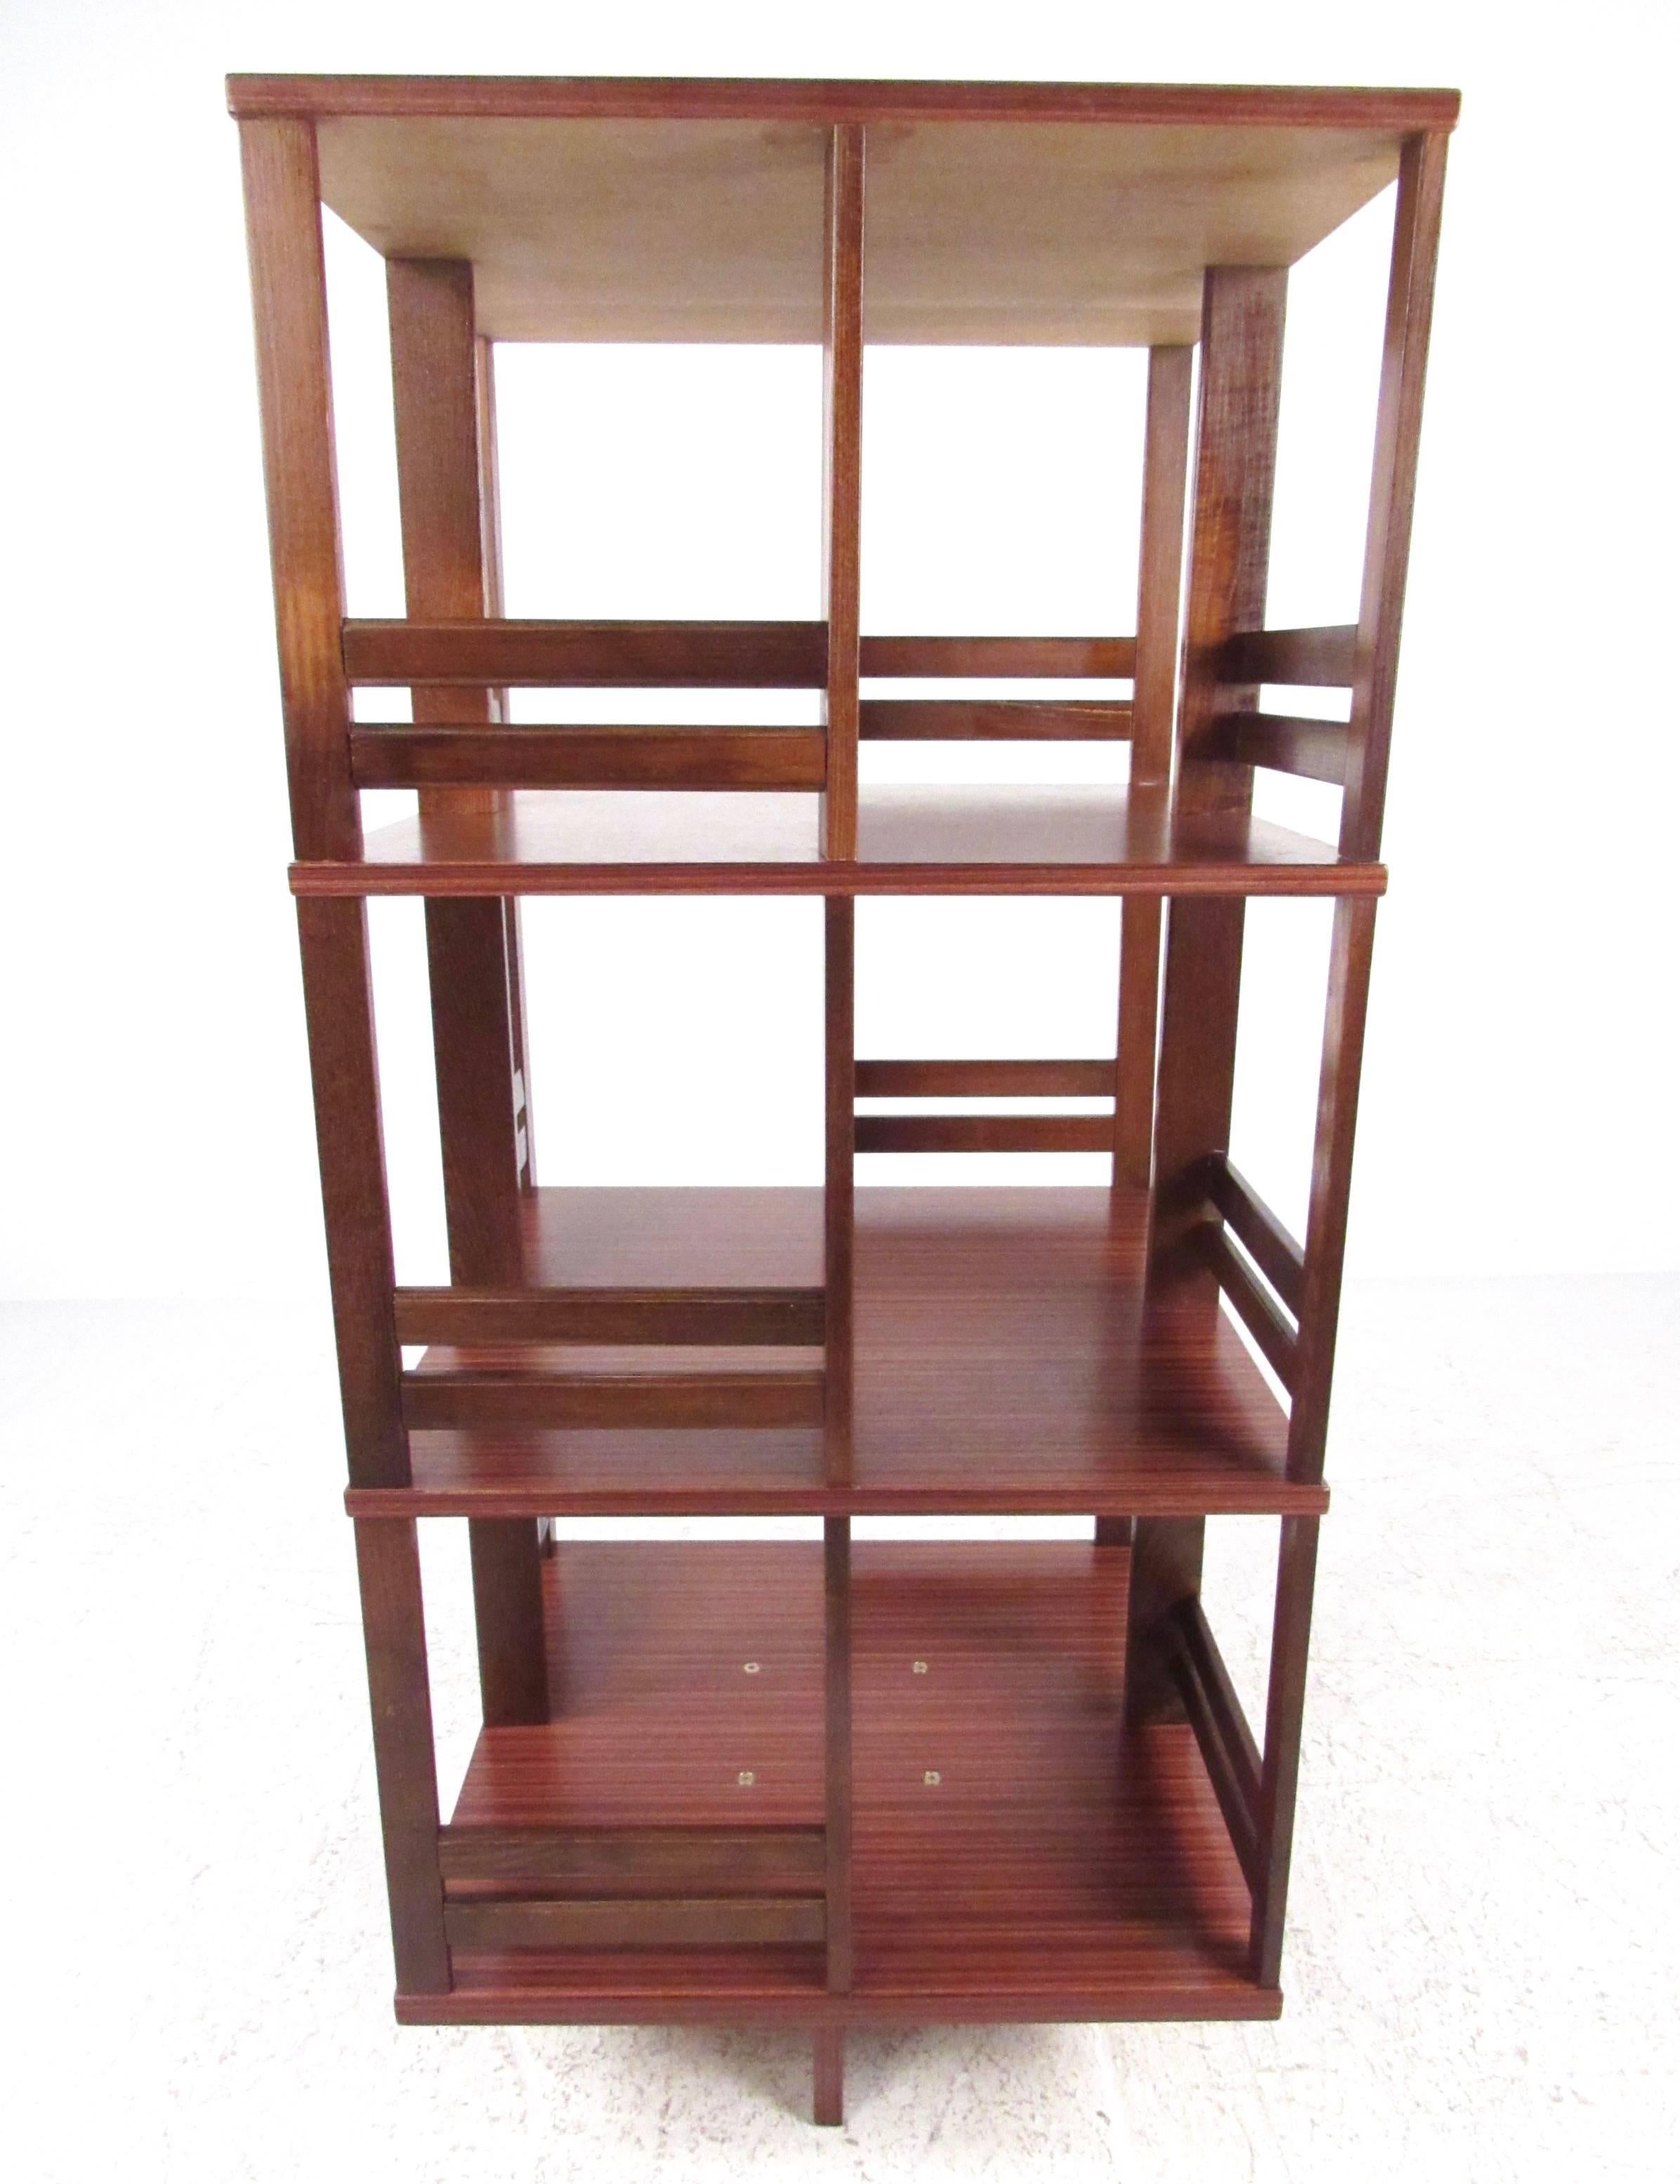 This stylish multi-tier bookshelf makes a unique storage piece for any setting. Idea for media storage or shop display, this unique wood finish shelf unit is perfect for home or business use. Please confirm item location (NY or NJ).